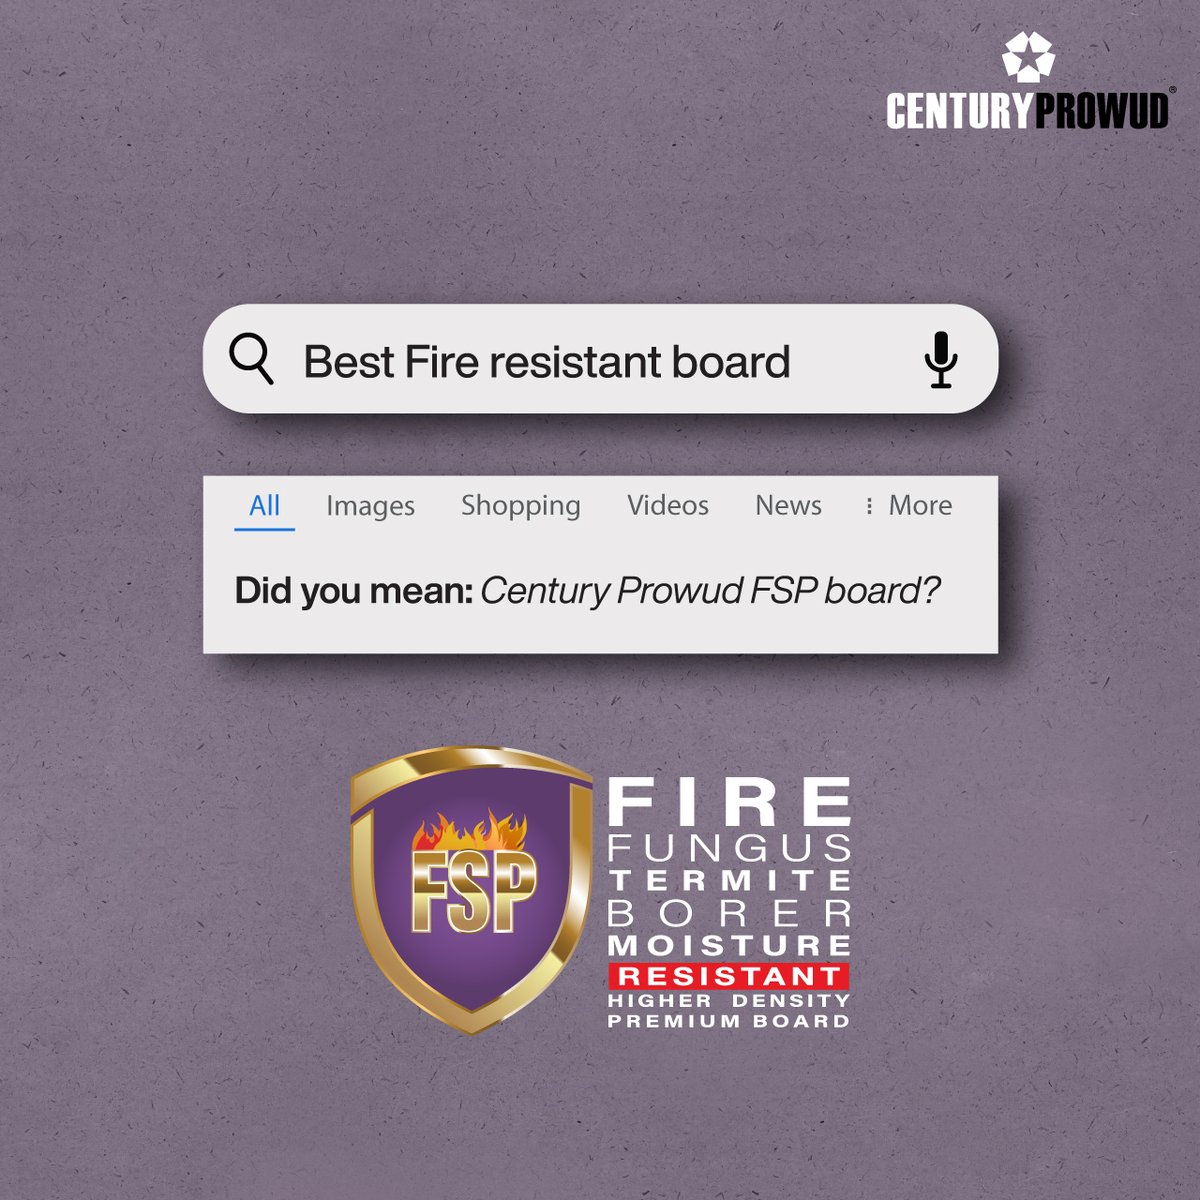 Looking for the best fire-resistant board? Look no further! Century Prowud FSP board offers best protection against fire hazards, ensuring safety and peace of mind.

#FireSafety #CenturyProwud #SafetyFirst #FurnitureTips #MoistureResistant #CenturyProwud #ItsProwud